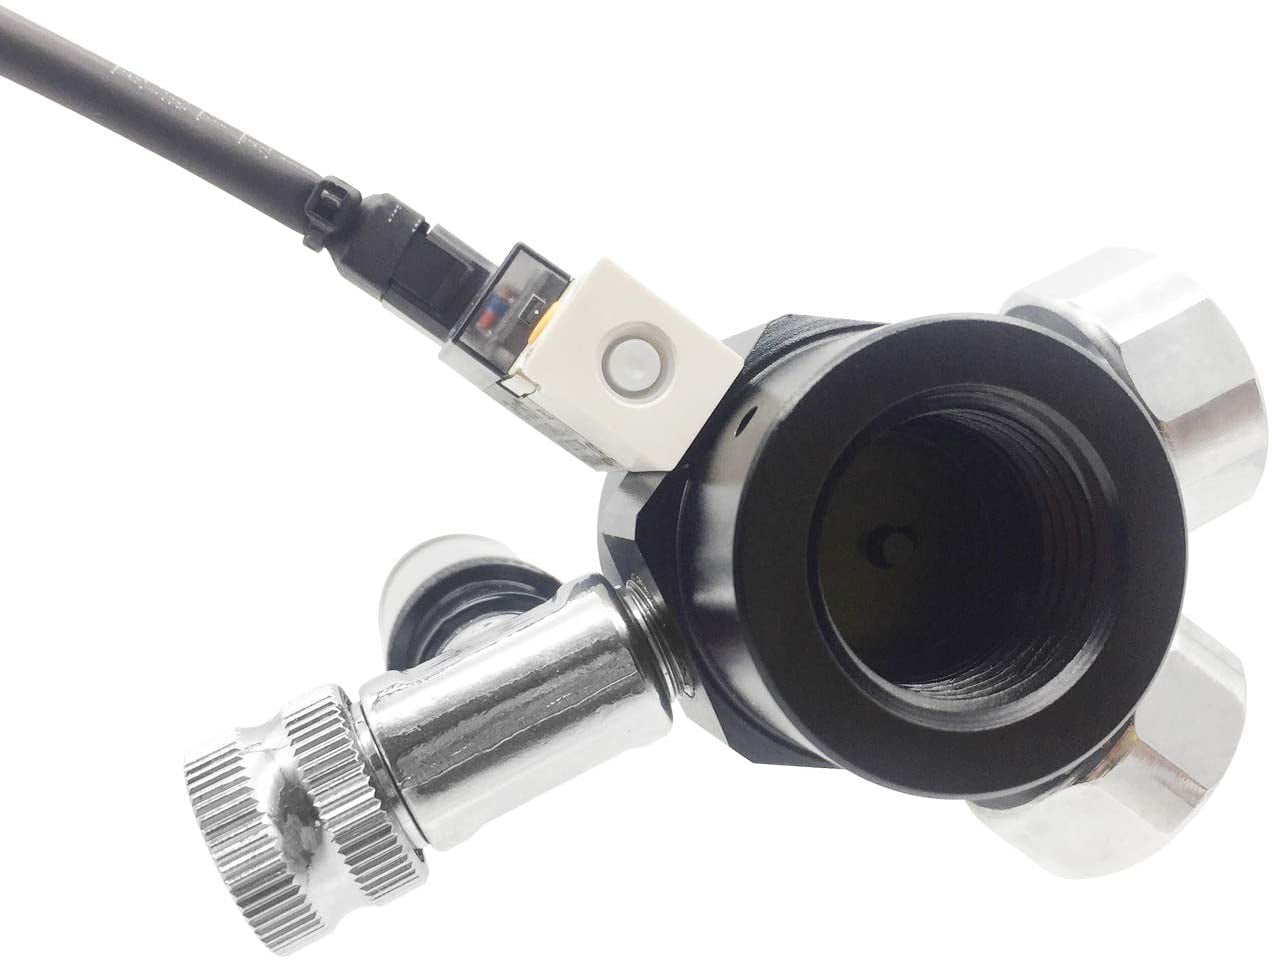 FZONE Aquarium CO2 Regulator for Paintball with DC Solenoid and Bubble Counter Check Valve 